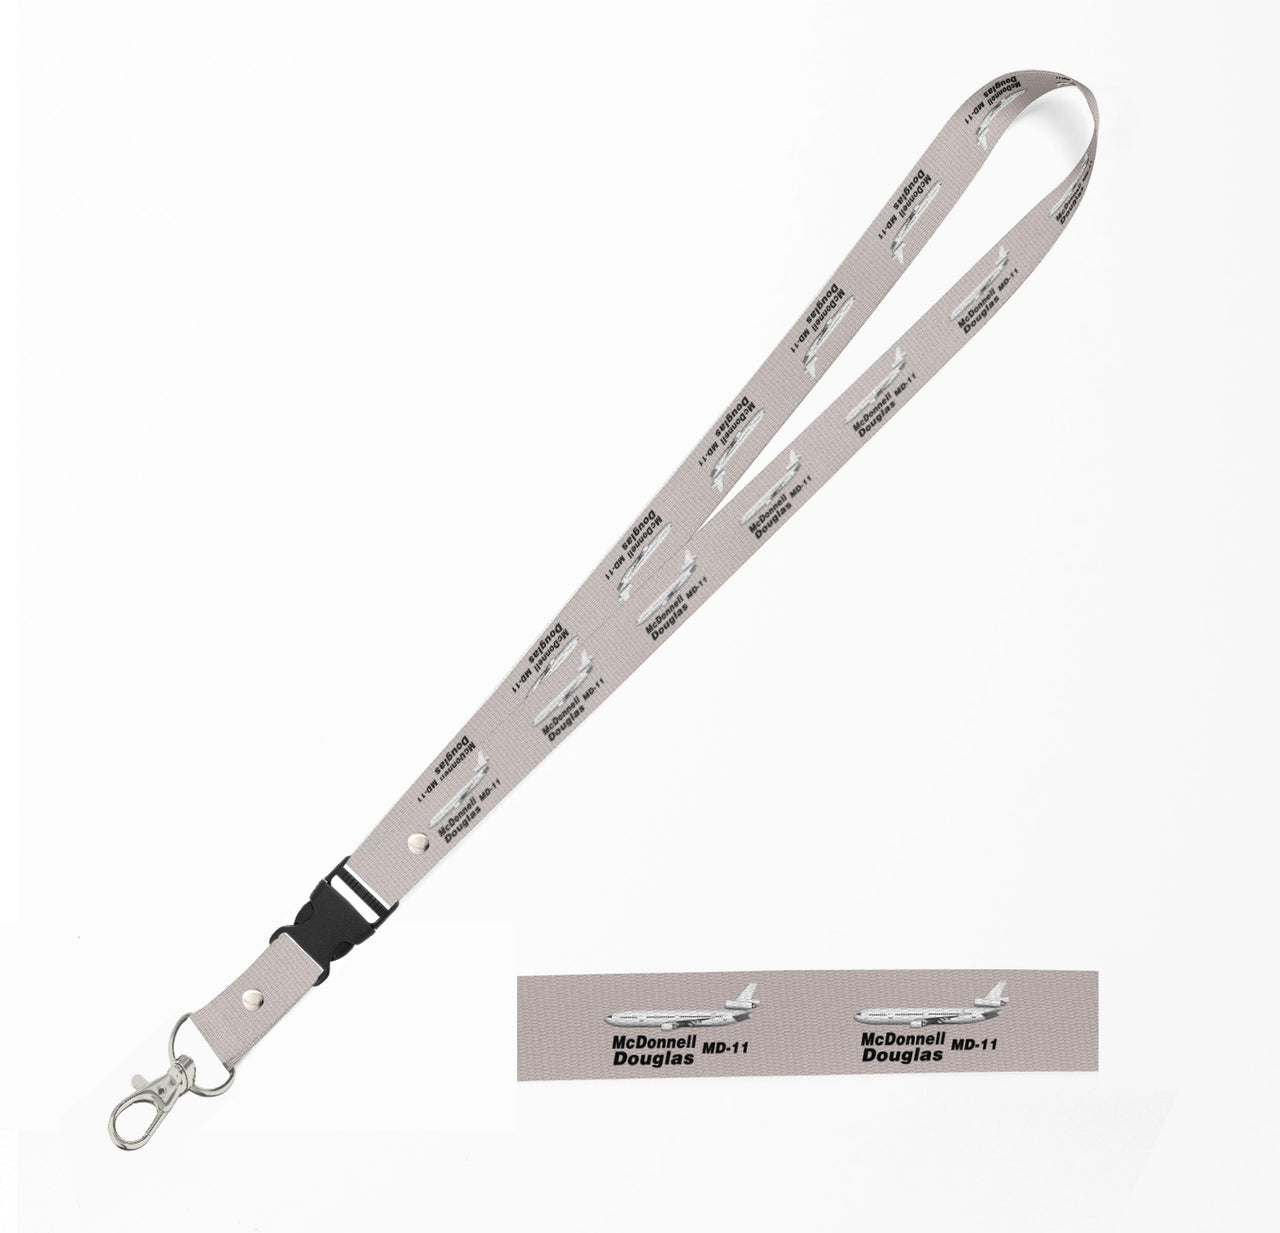 The McDonnell Douglas MD-11 Designed Detachable Lanyard & ID Holders